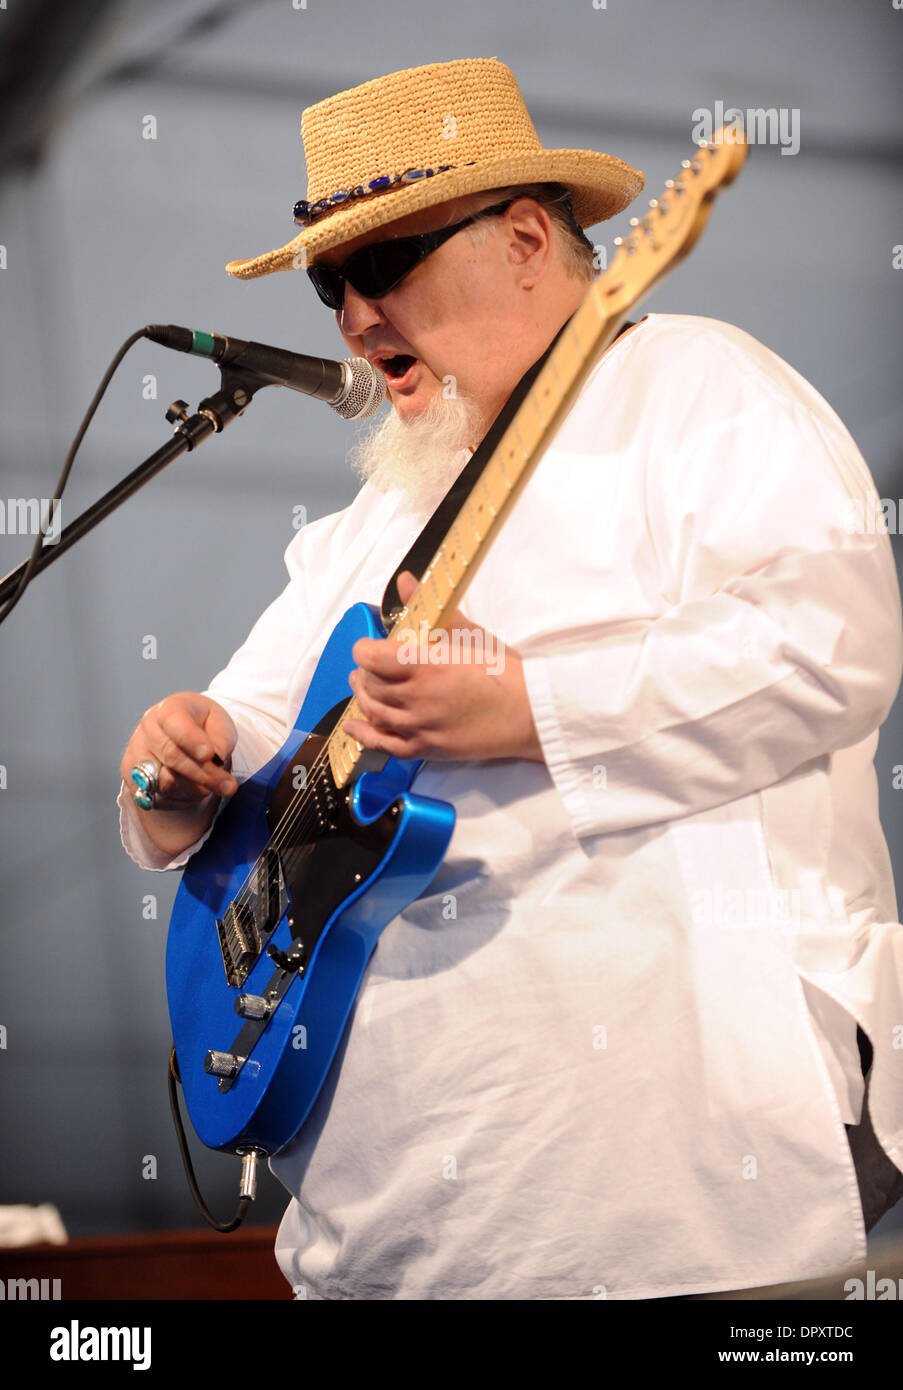 May 02, 2009 - New Orleans, Louisiana, USA - Blues Guitarist BRYAN LEE &  The Blues Power Band performs live at the New Orleans Jazz and Heritage  Festival 2009 at the New